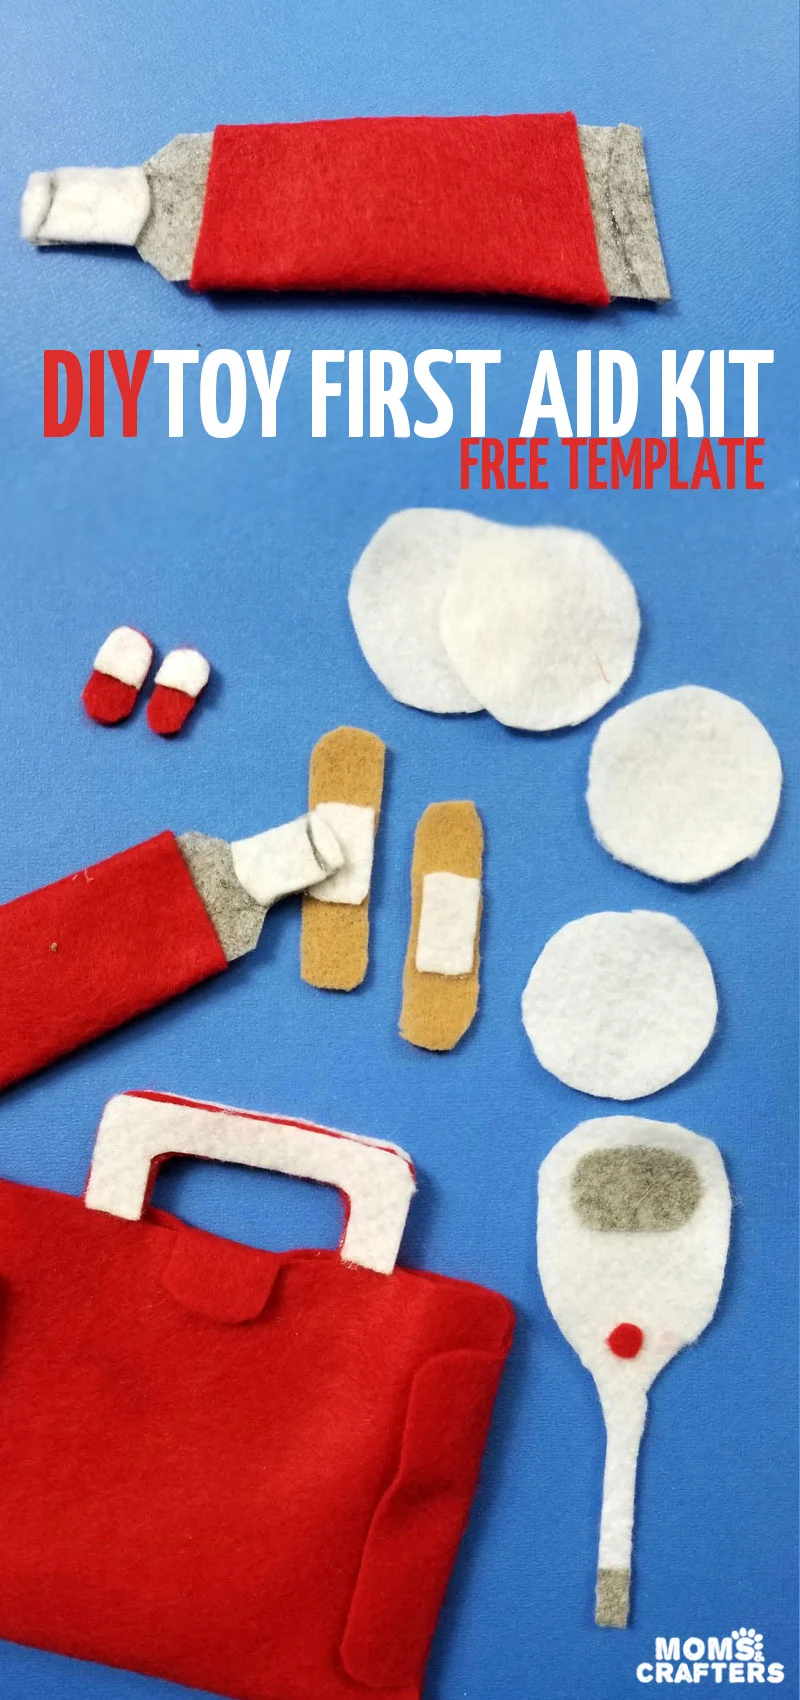 DIY toy first aid kit - make your own no-sew first aid set to use with doll play! Perfect for July 4th and independence day and teaching your child about summer time injuries! #july4th #summer #diytoy #momcraft